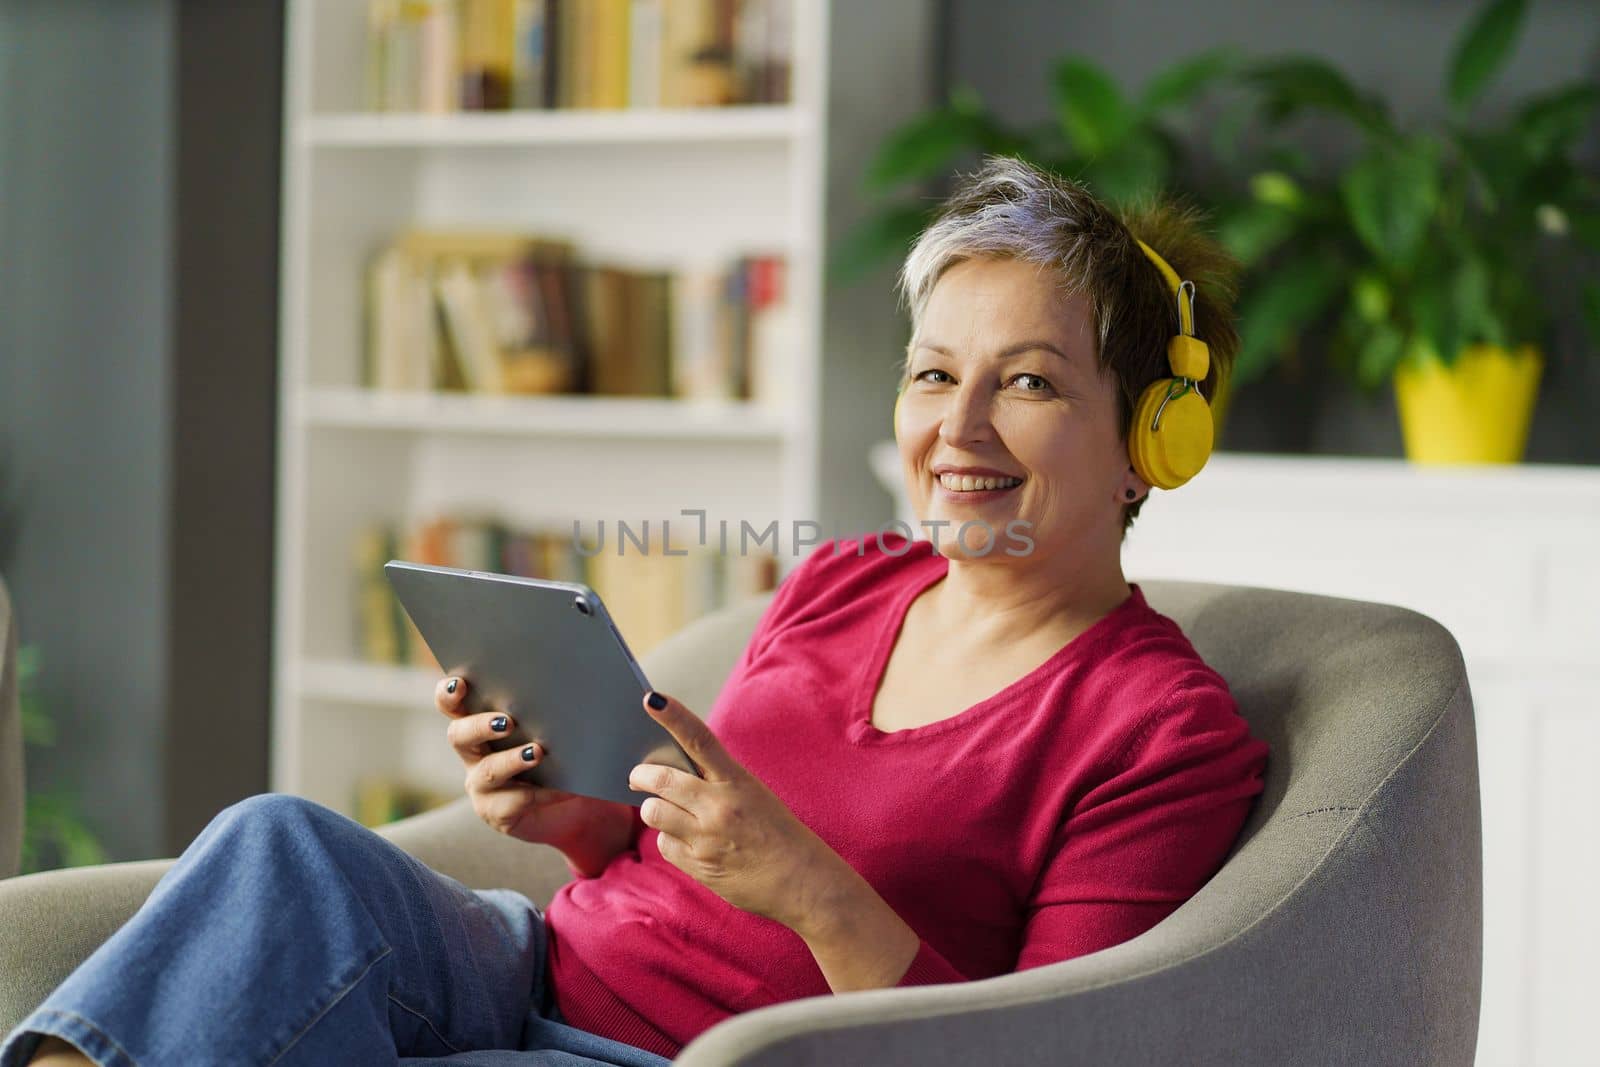 Mature woman smiles on a sofa, holding tablet PC and listening to music on headphones. She enjoys leisure, technology and music, feeling tranquil and blissful. High quality photo